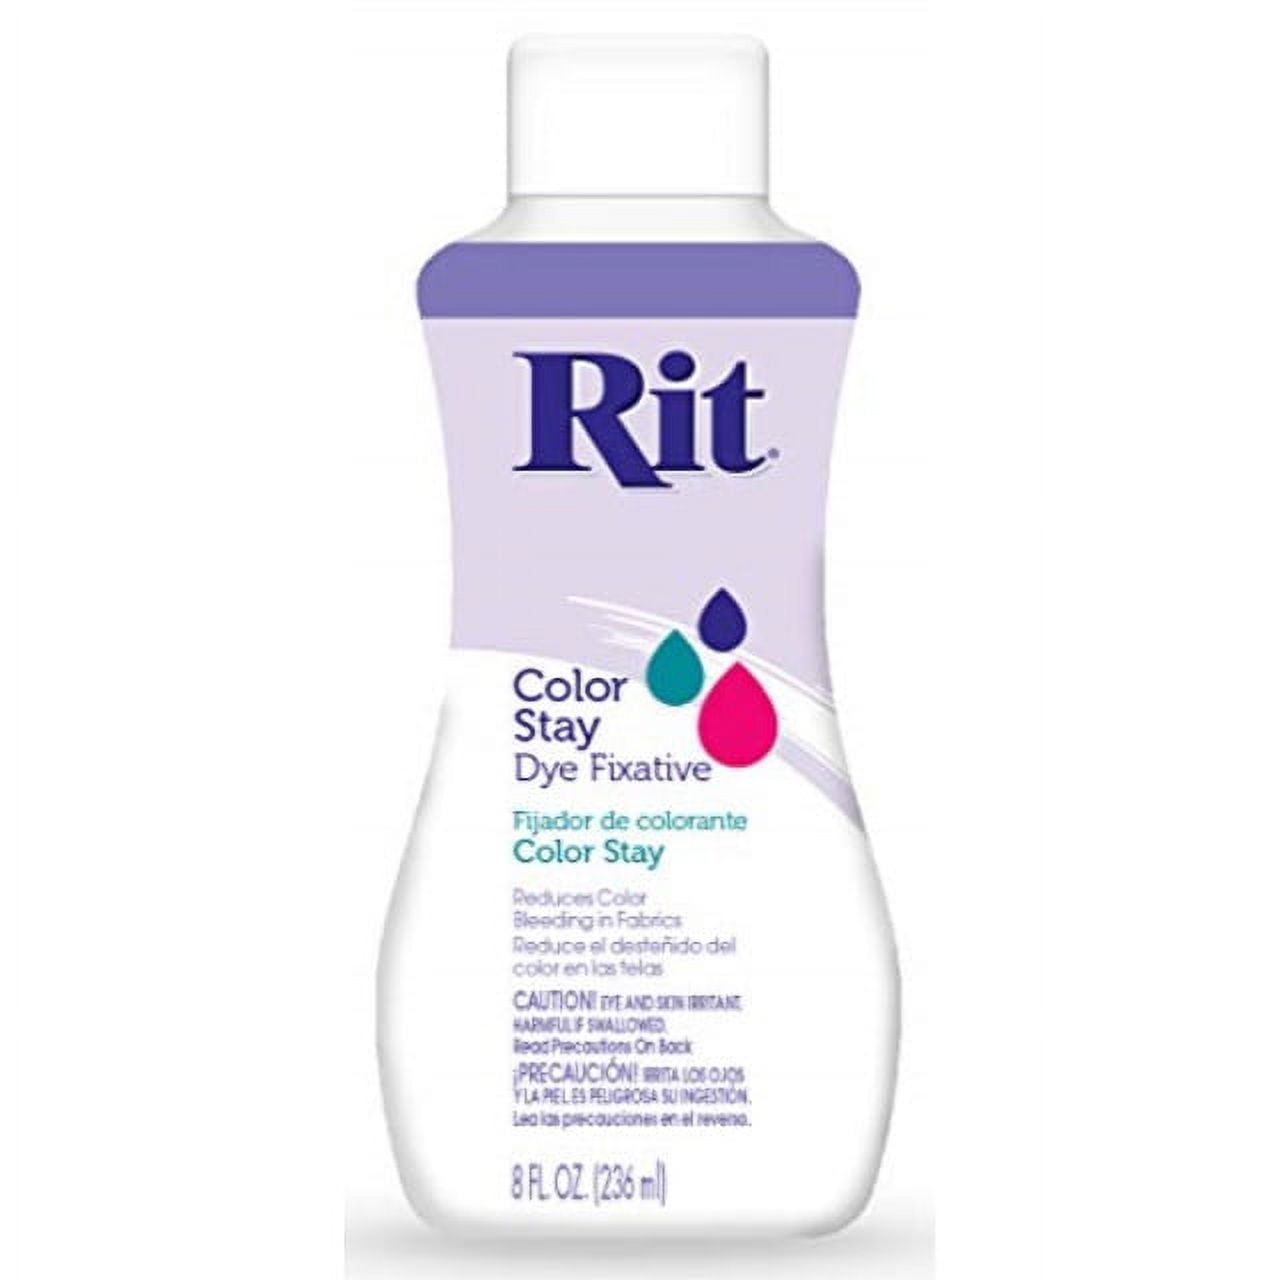  Rit ColorStay Dye Fixative Enhances and Retain Colors Reduces  Bleeding Great for Most Fabric for Dye Projects for Recently Dyed Fabric  for Durability (8z)